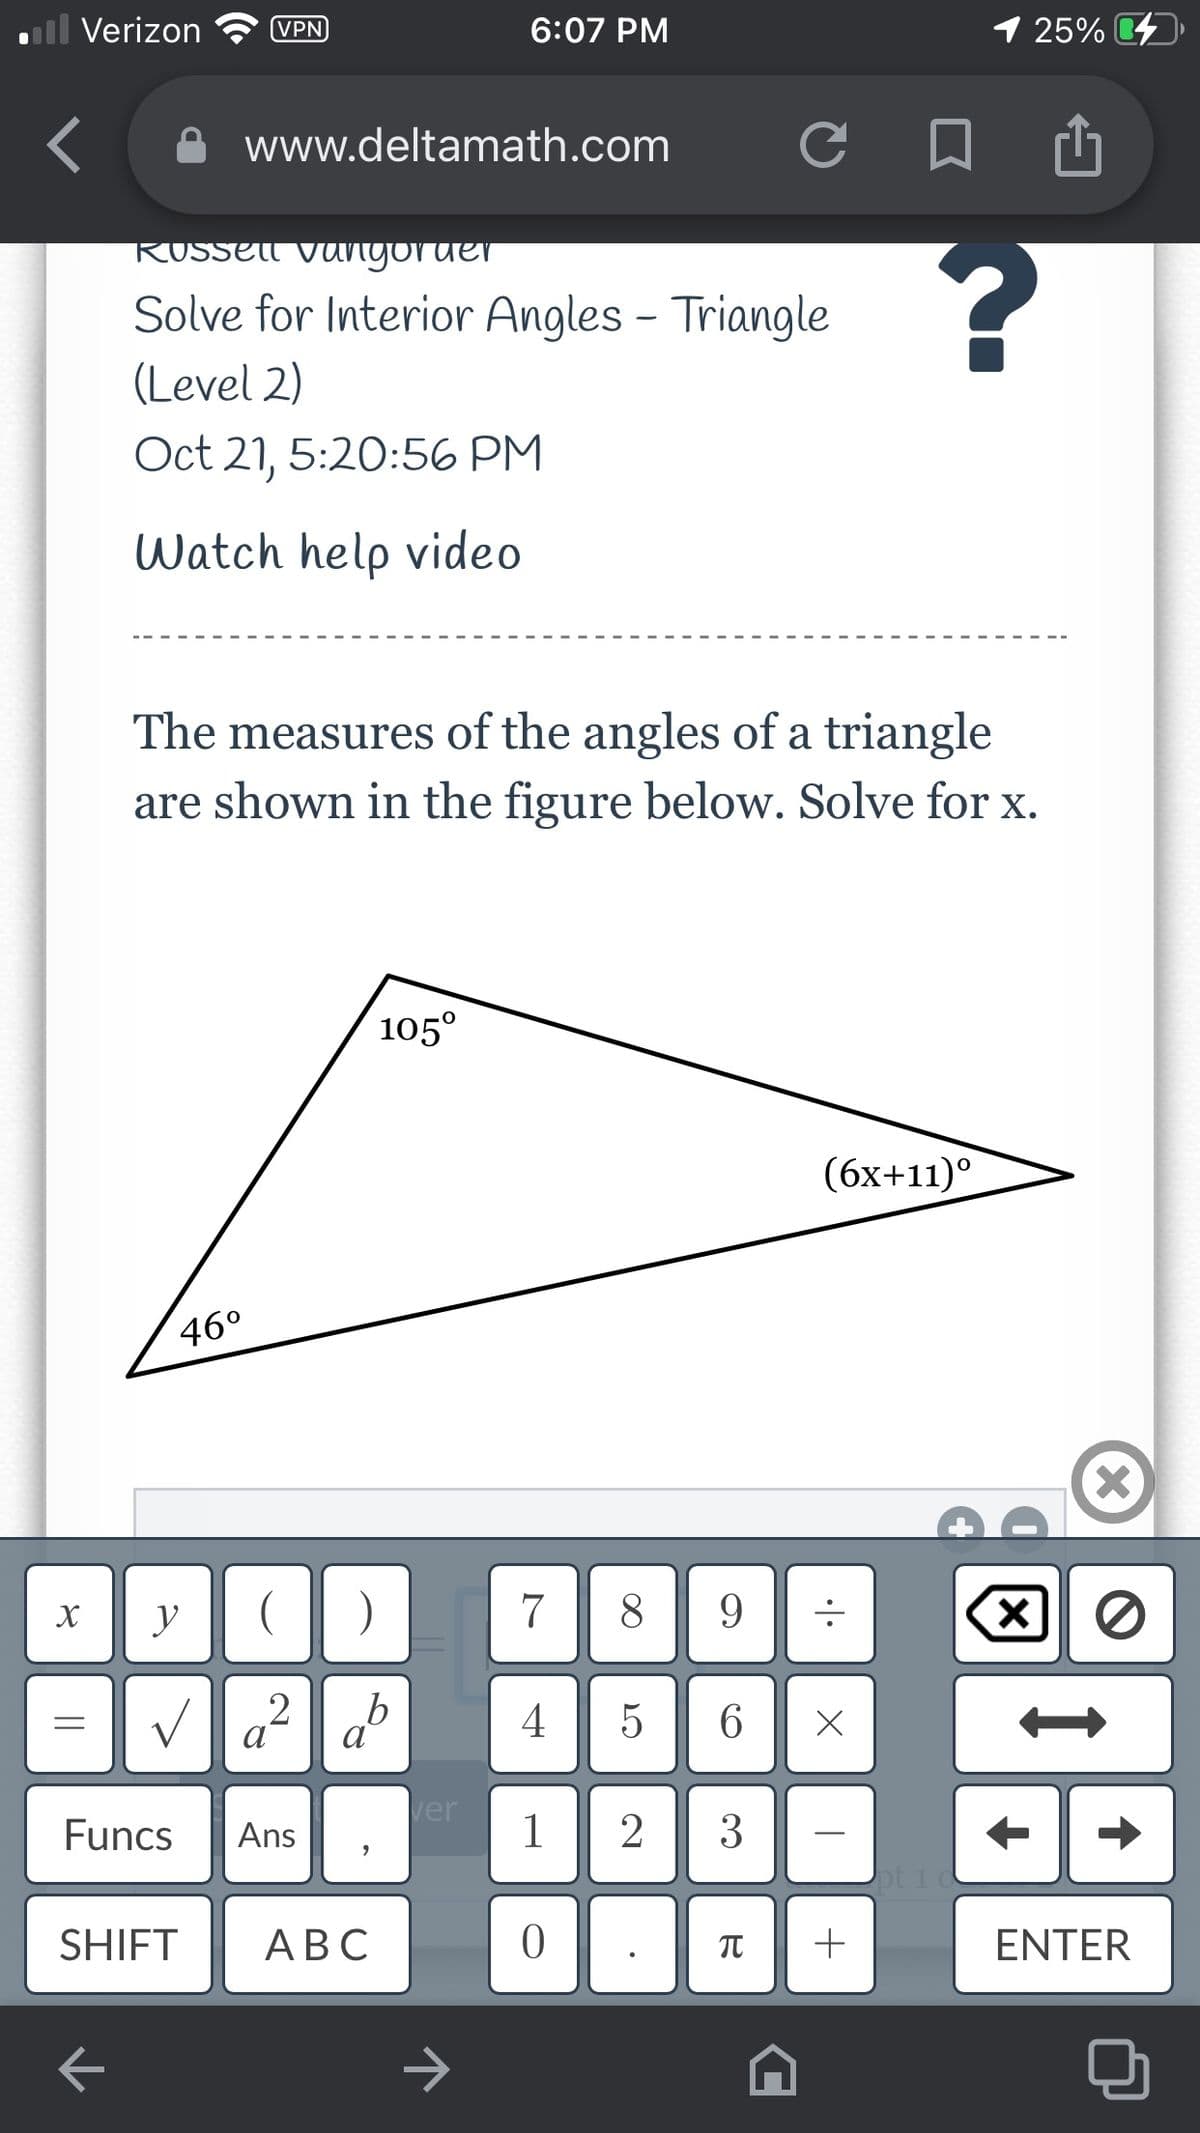 ll Verizon
VPN
6:07 PM
1 25%
O www.deltamath.com
RUSSEll vangoruer
Solve for Interior Angles - Triangle
(Level 2)
Oct 21, 5:20:56 PM
Watch help video
The measures of the angles of a triangle
are shown in the figure below. Solve for x.
105°
(бх+11)°
46°
X
y
7
8
a² d
2
4| 5
6.
Funcs
ver
1
2
3
Ans
Joti
SHIFT
АВС
+
ENTER
|
